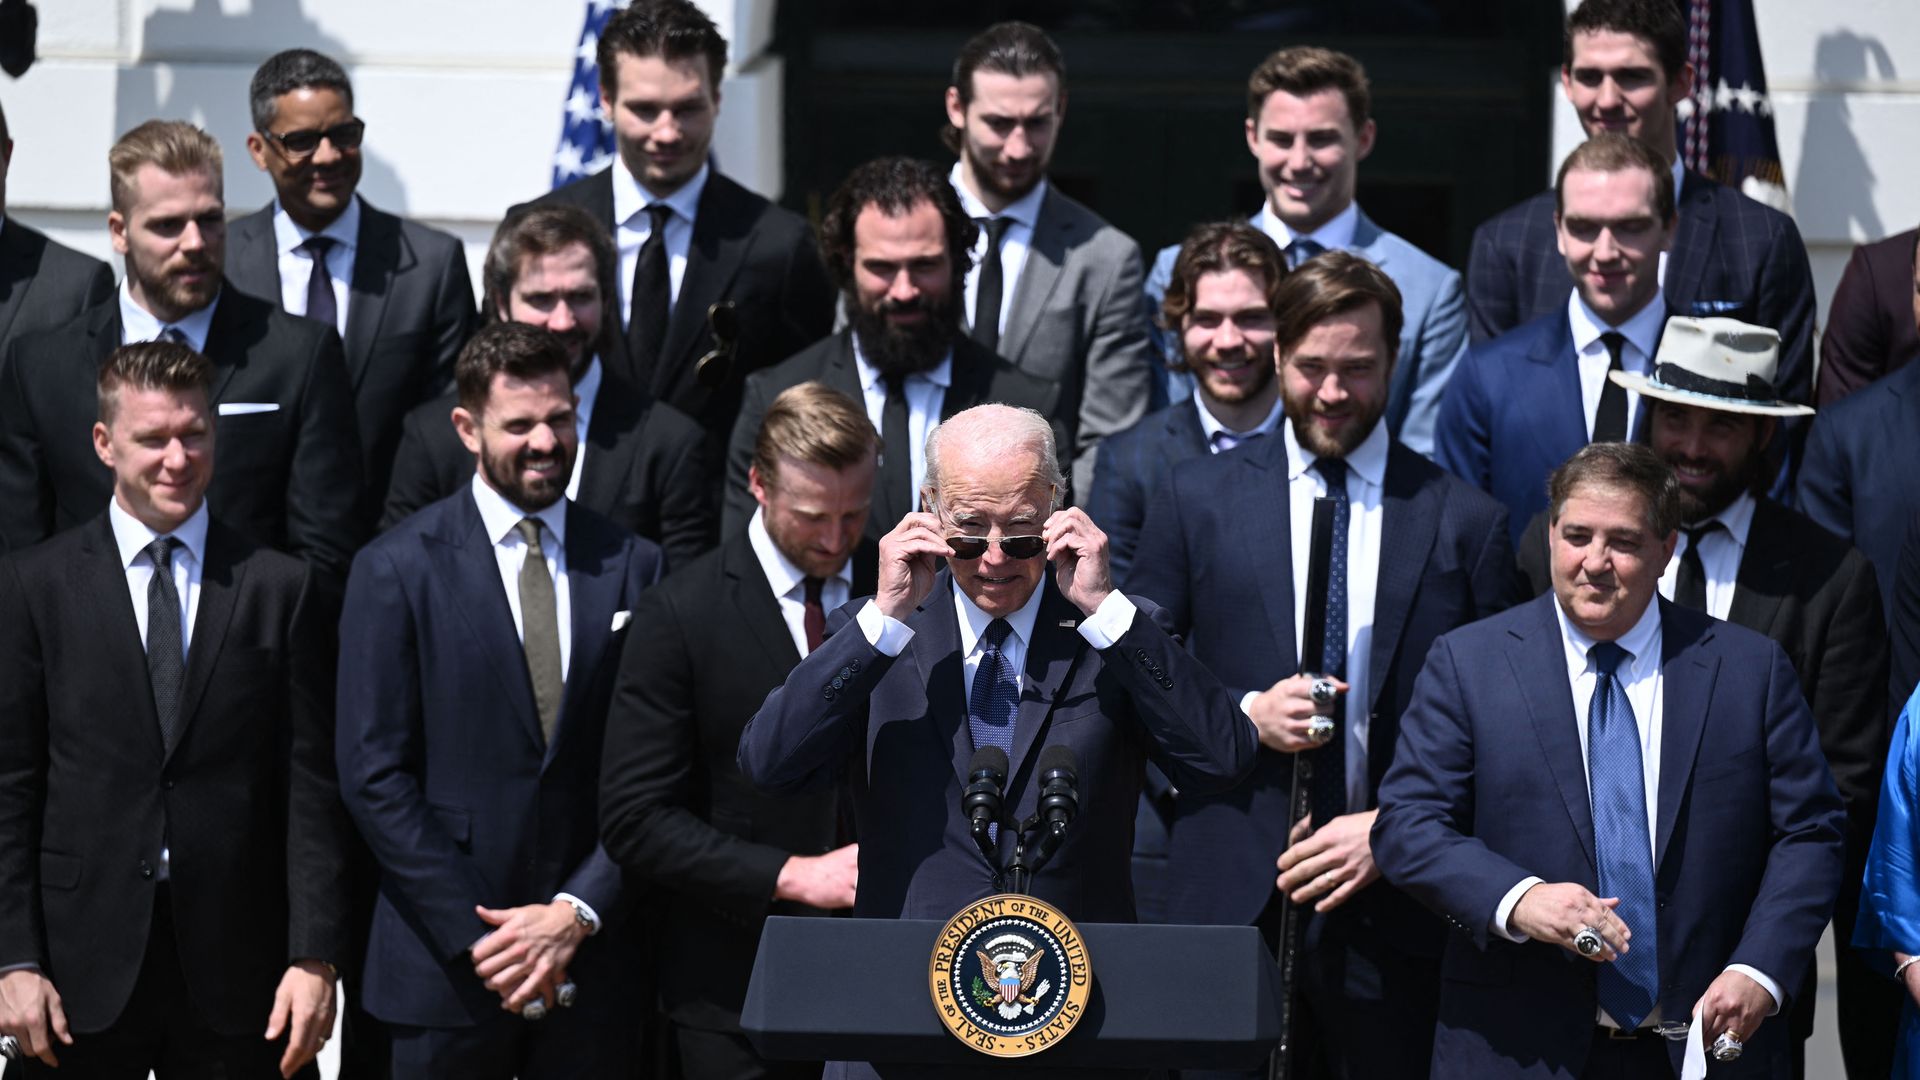 Joe Biden lifts down his sunglasses as members of the Lightning stand behind him in suits